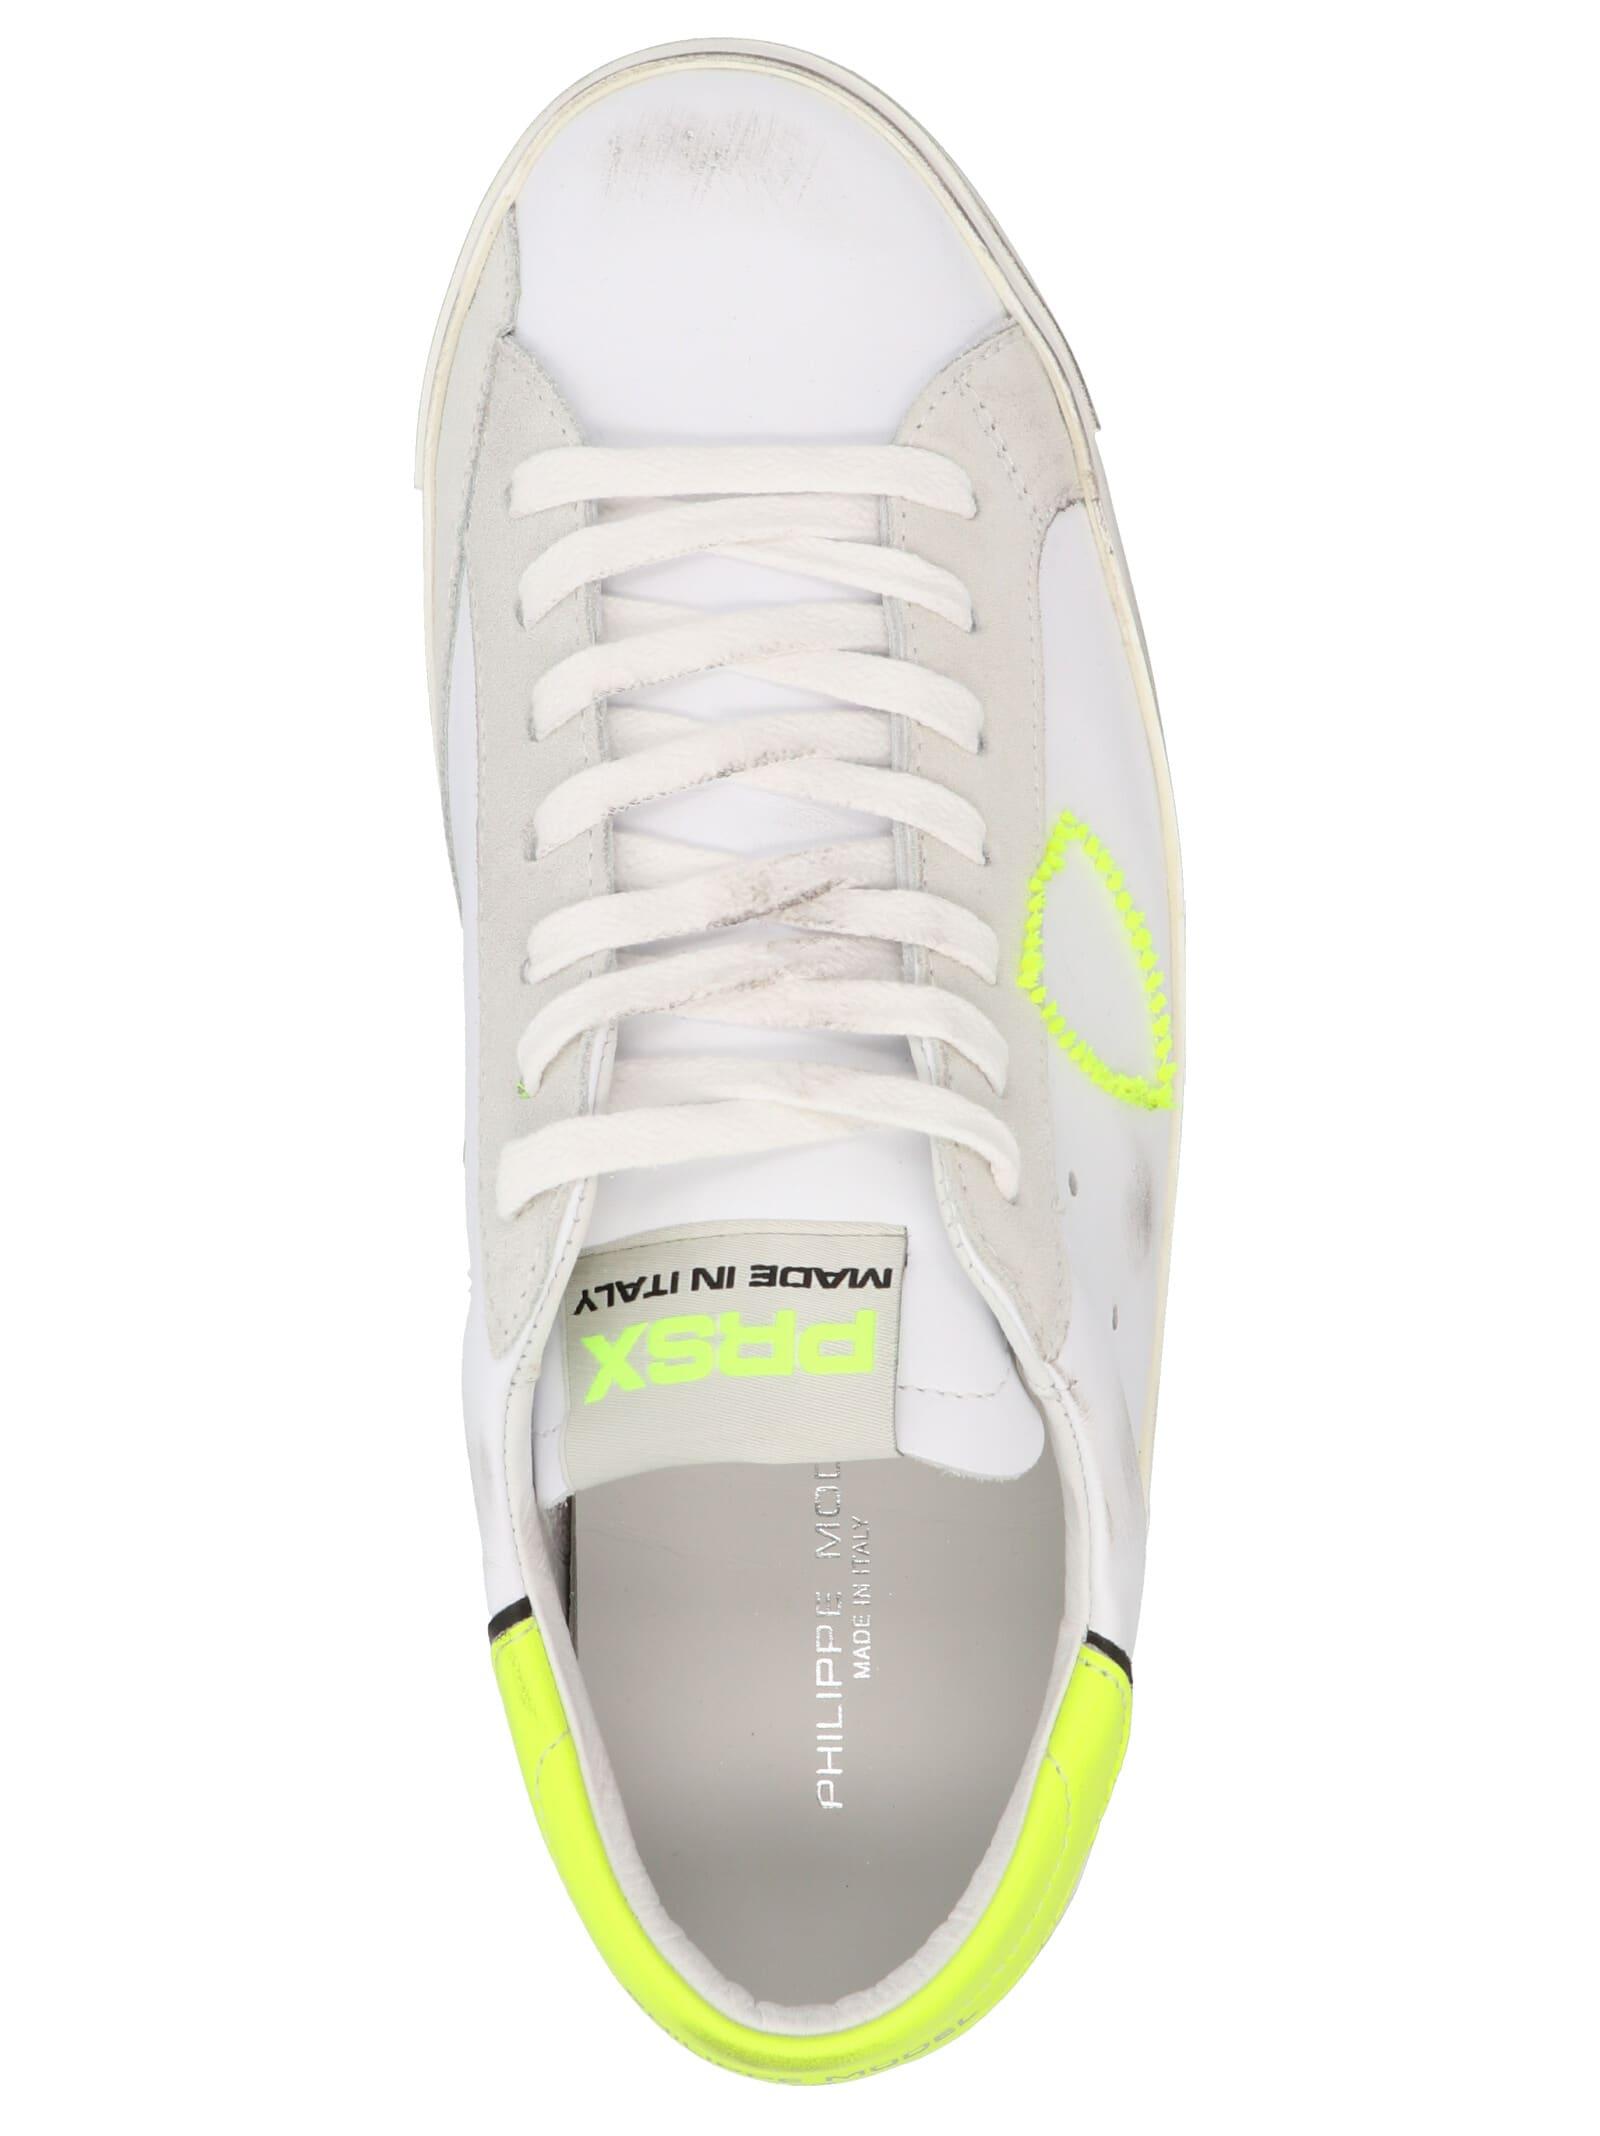 White Philippe Model Leather Prsx Sneakers in Yellow Mens Trainers Philippe Model Trainers Save 10% for Men 